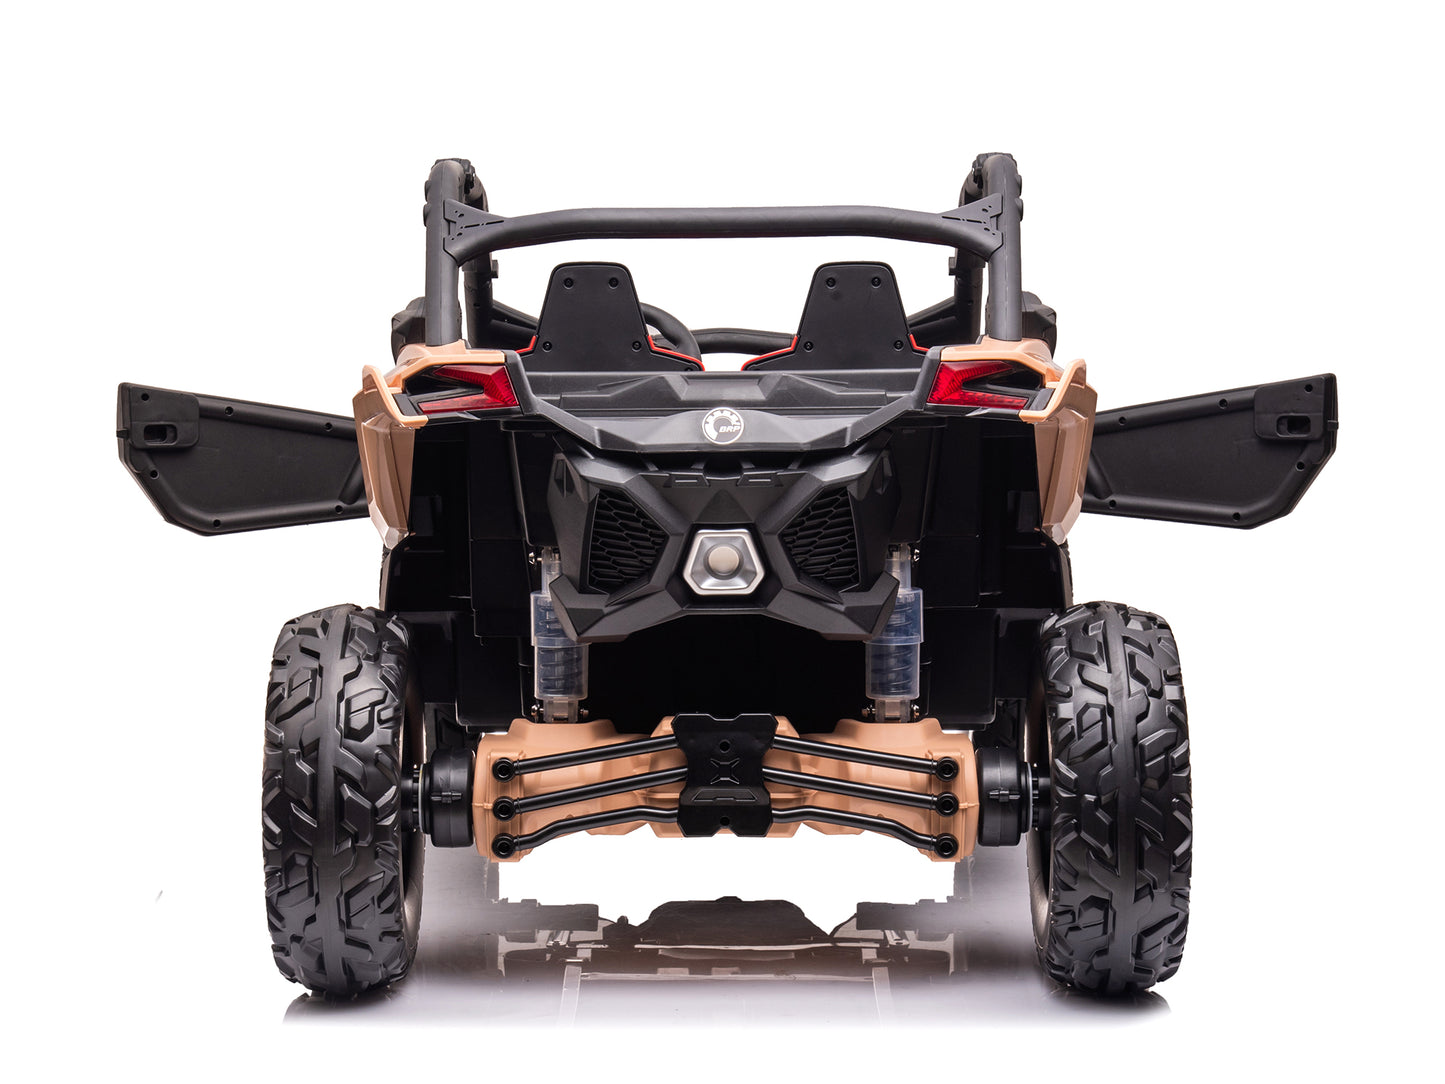 24V Can-Am Maverick X3 Kids Ride-On Buggy - RS Edition